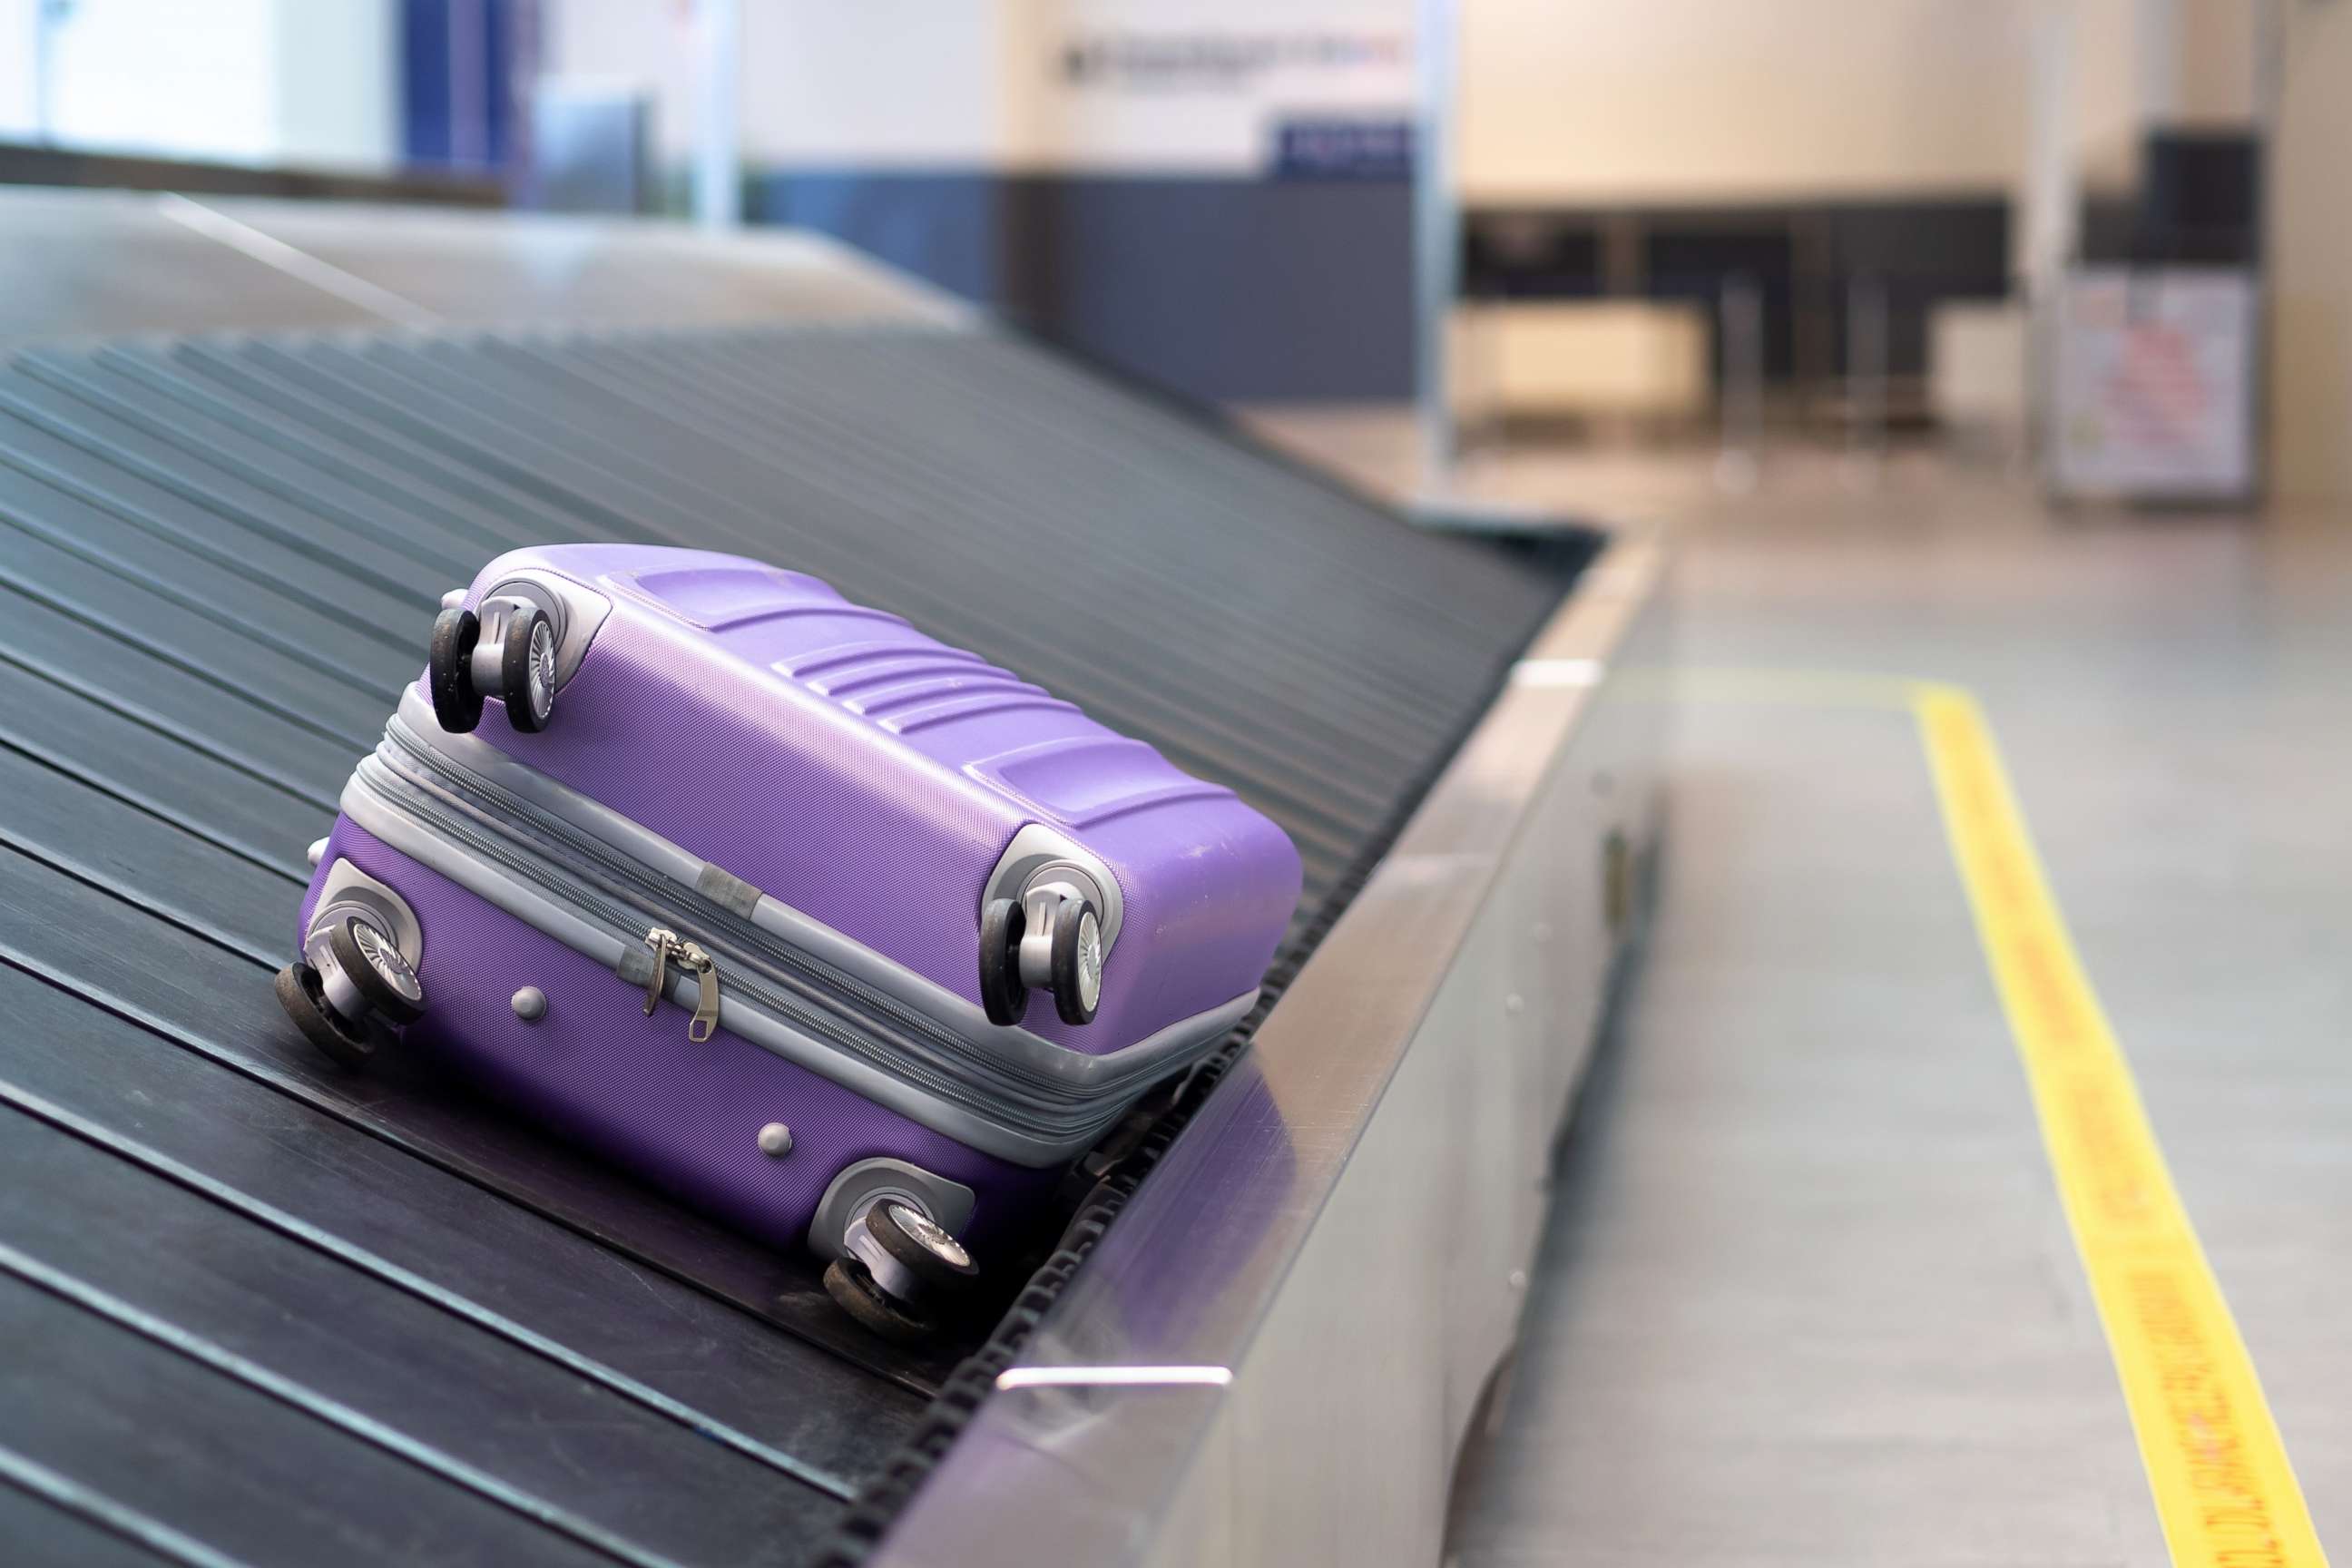 PHOTO: A suitcase rides a baggage claim conveyor belt in this stock photo.